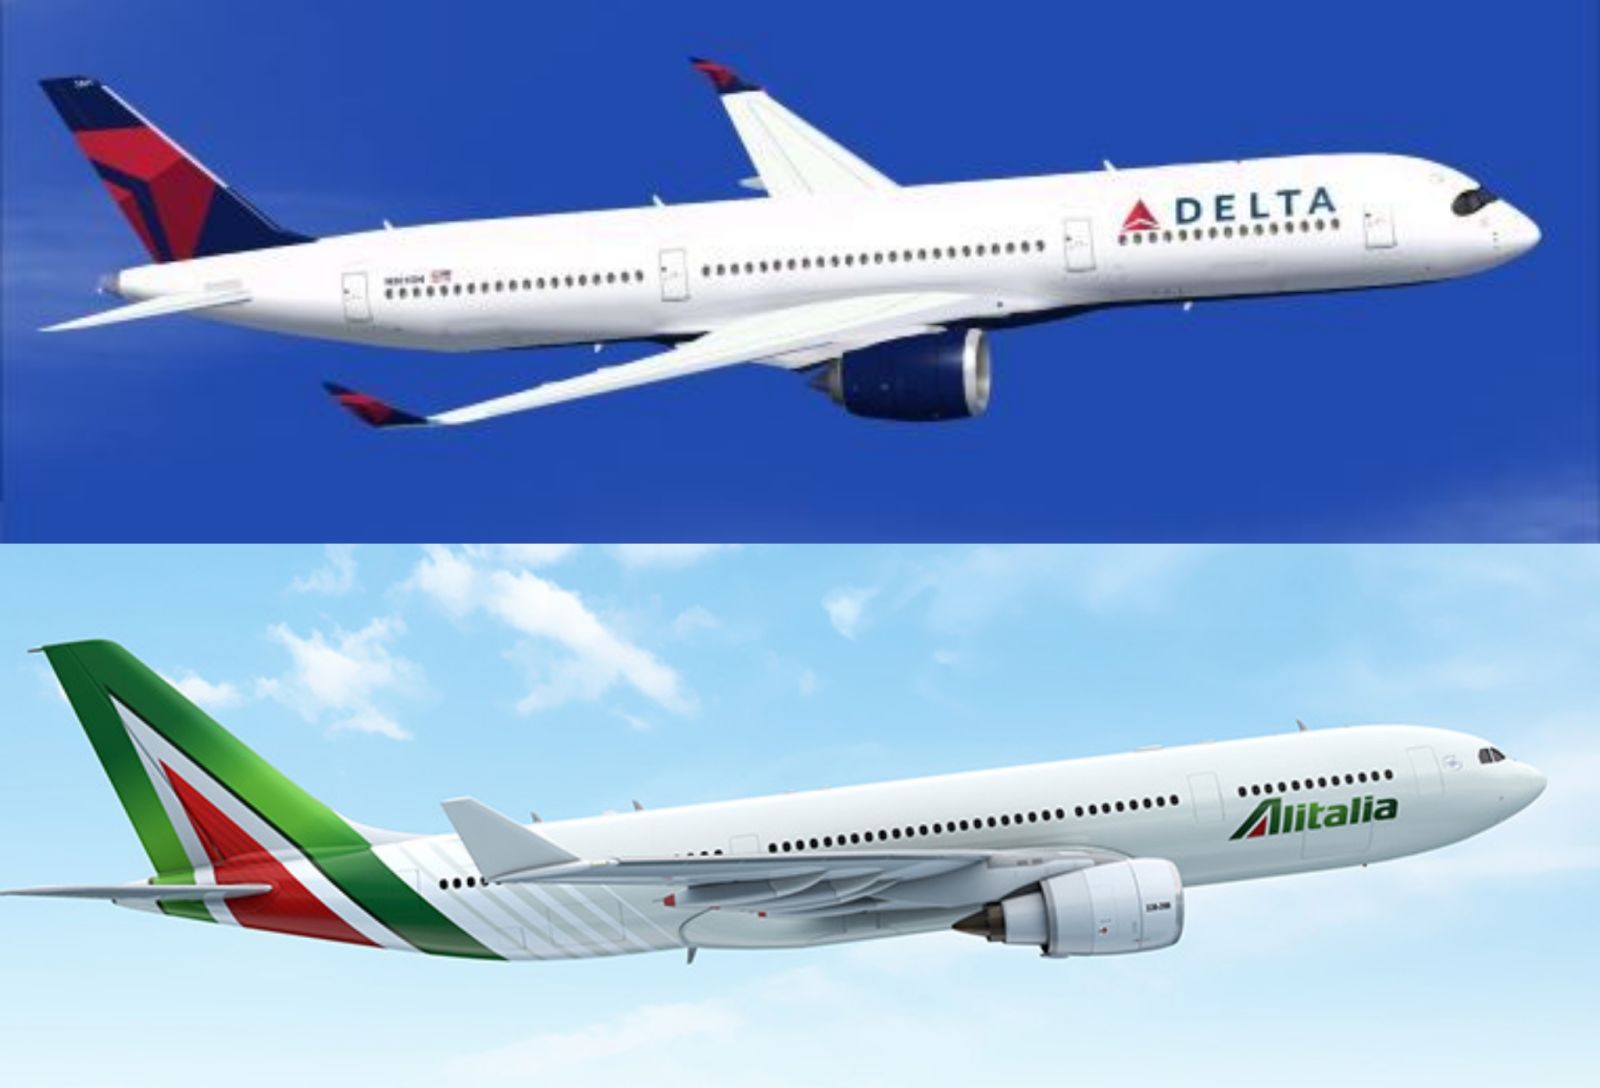 Illustration for article titled Delta wont speculate on Alitalia partnership